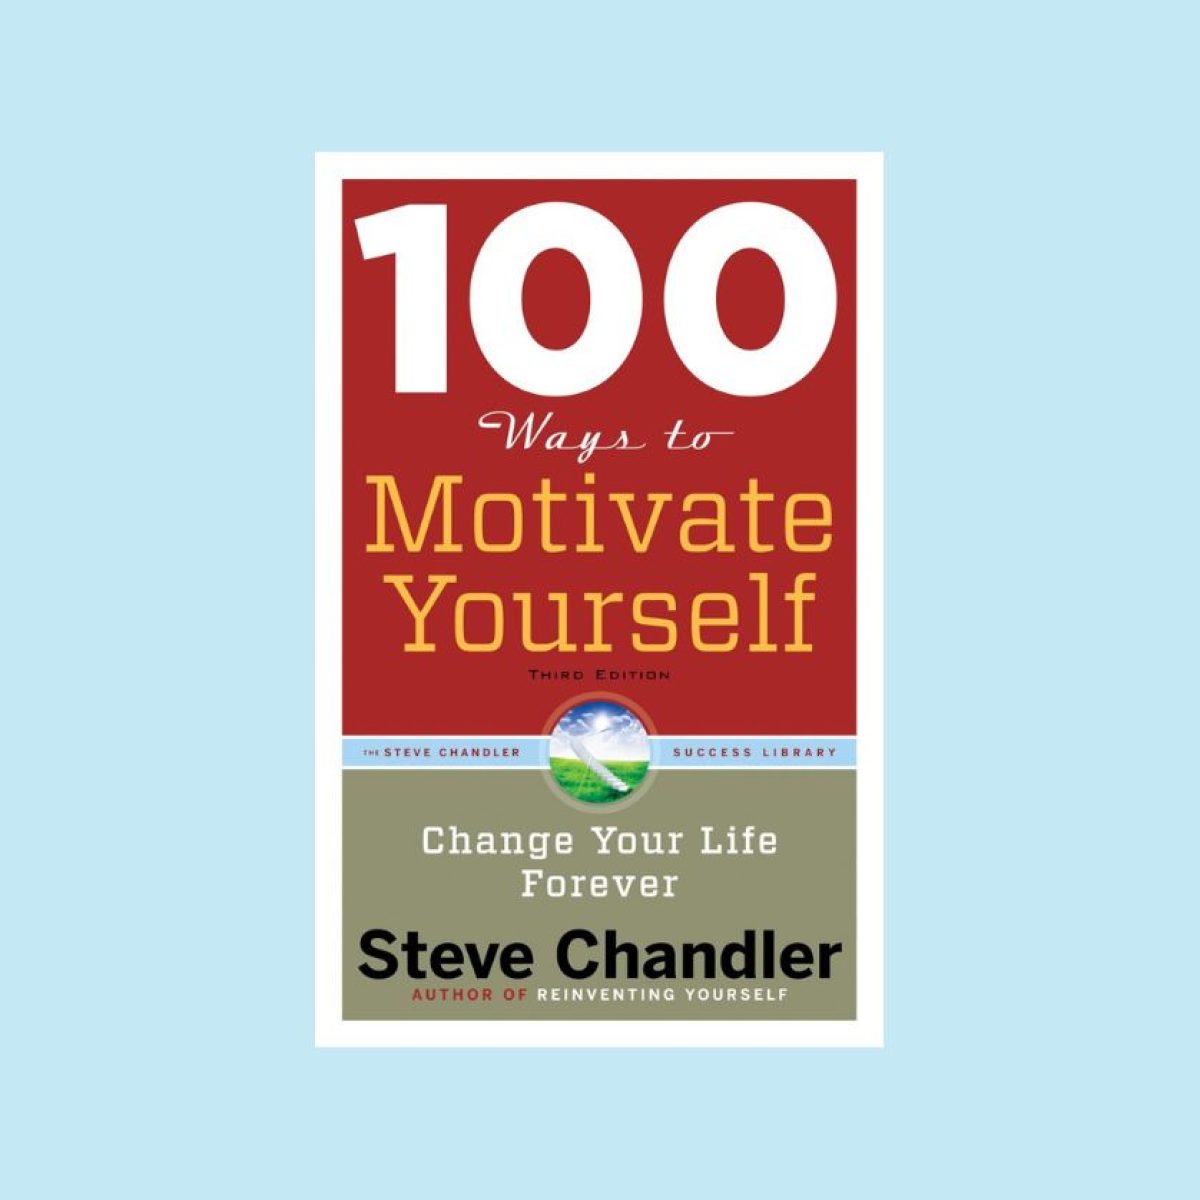 100 ways to motivate yourself change your life by steve chandler.